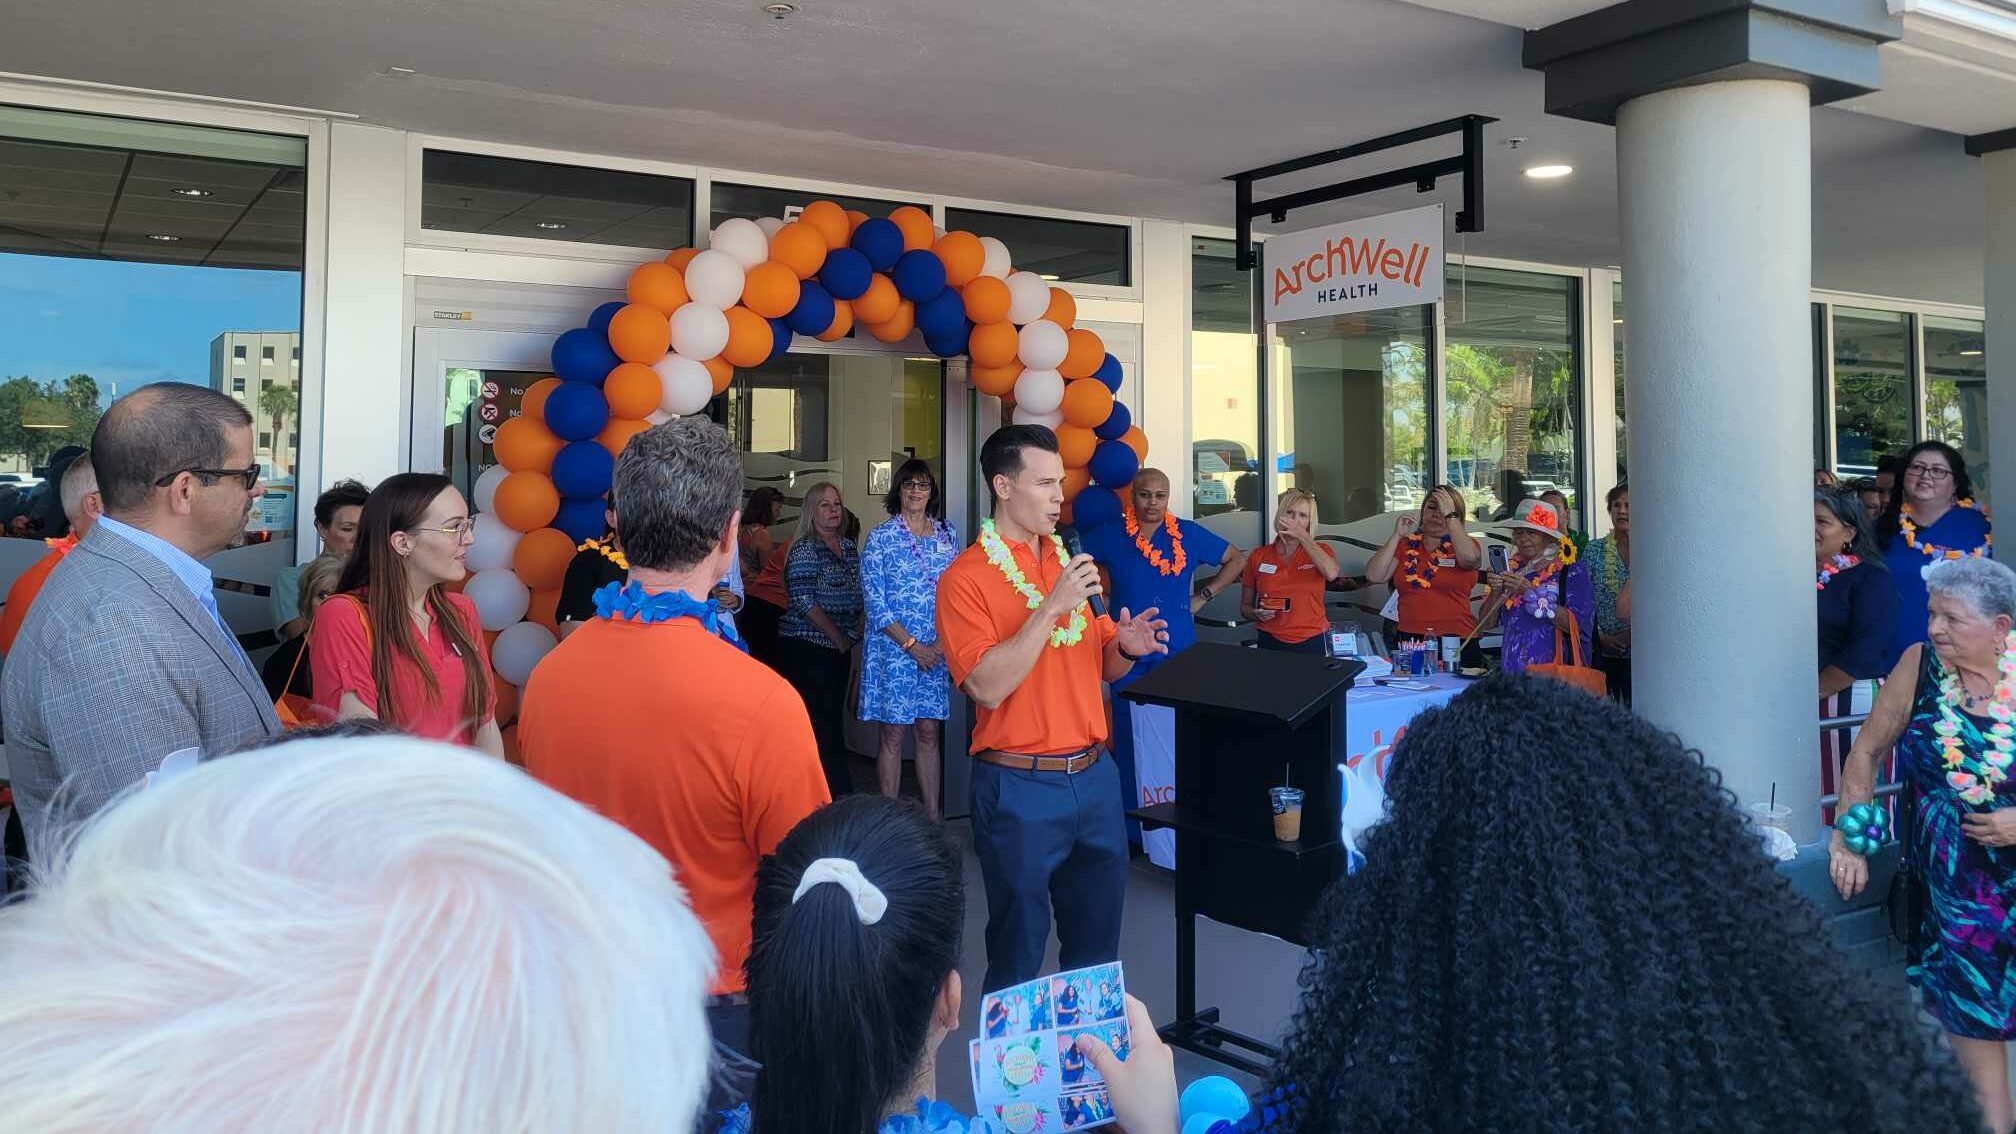 grand opening archwell entrance orange blue white balloon arch